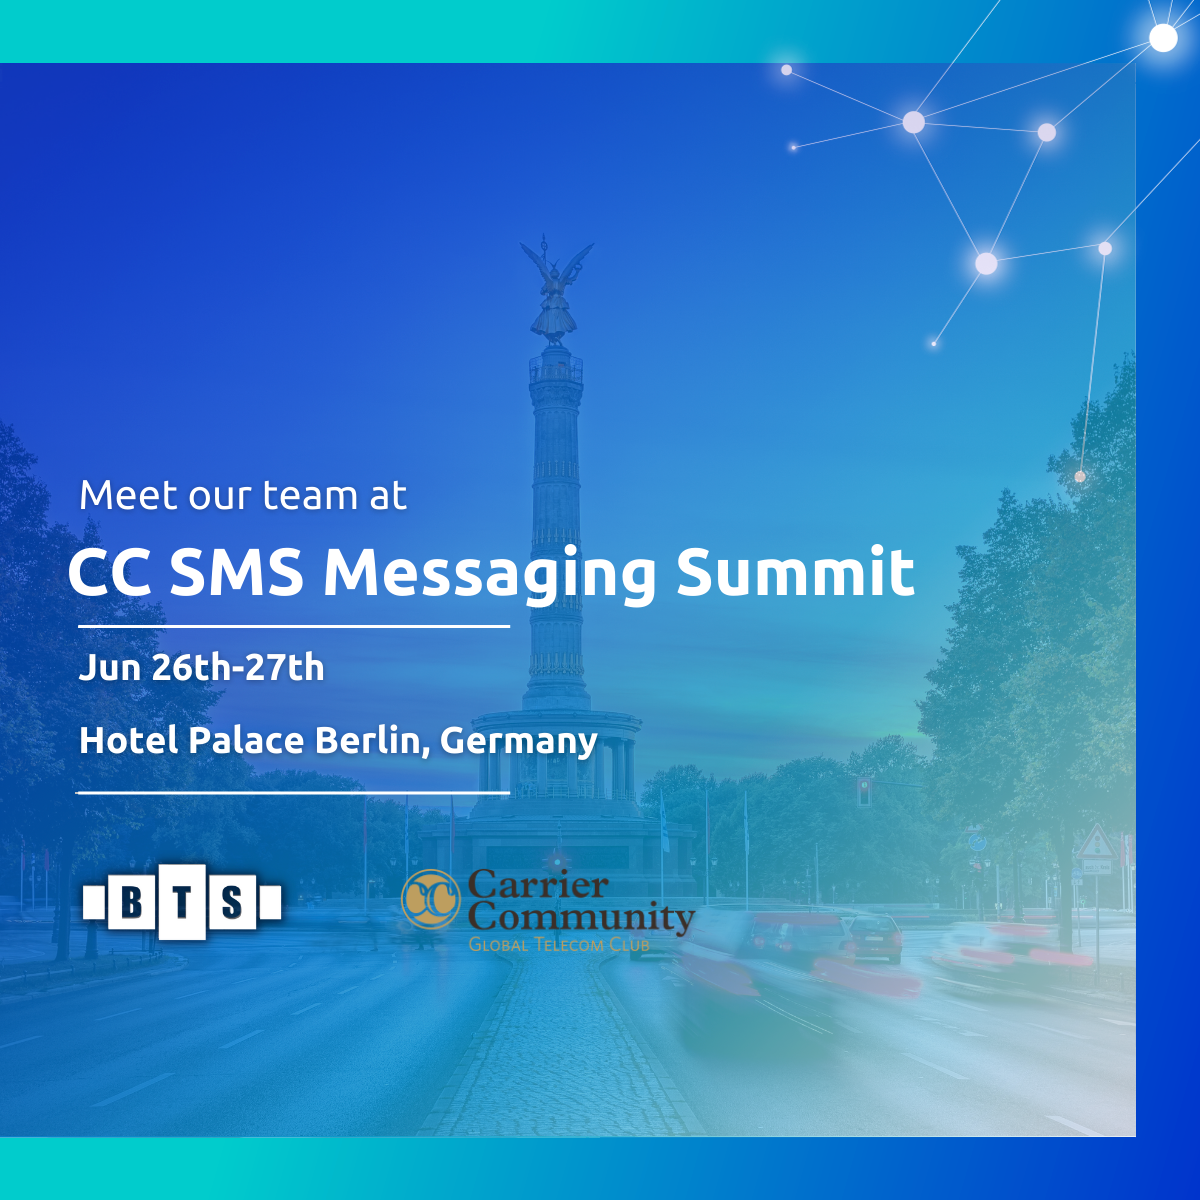 CC SMS Messaging Summit